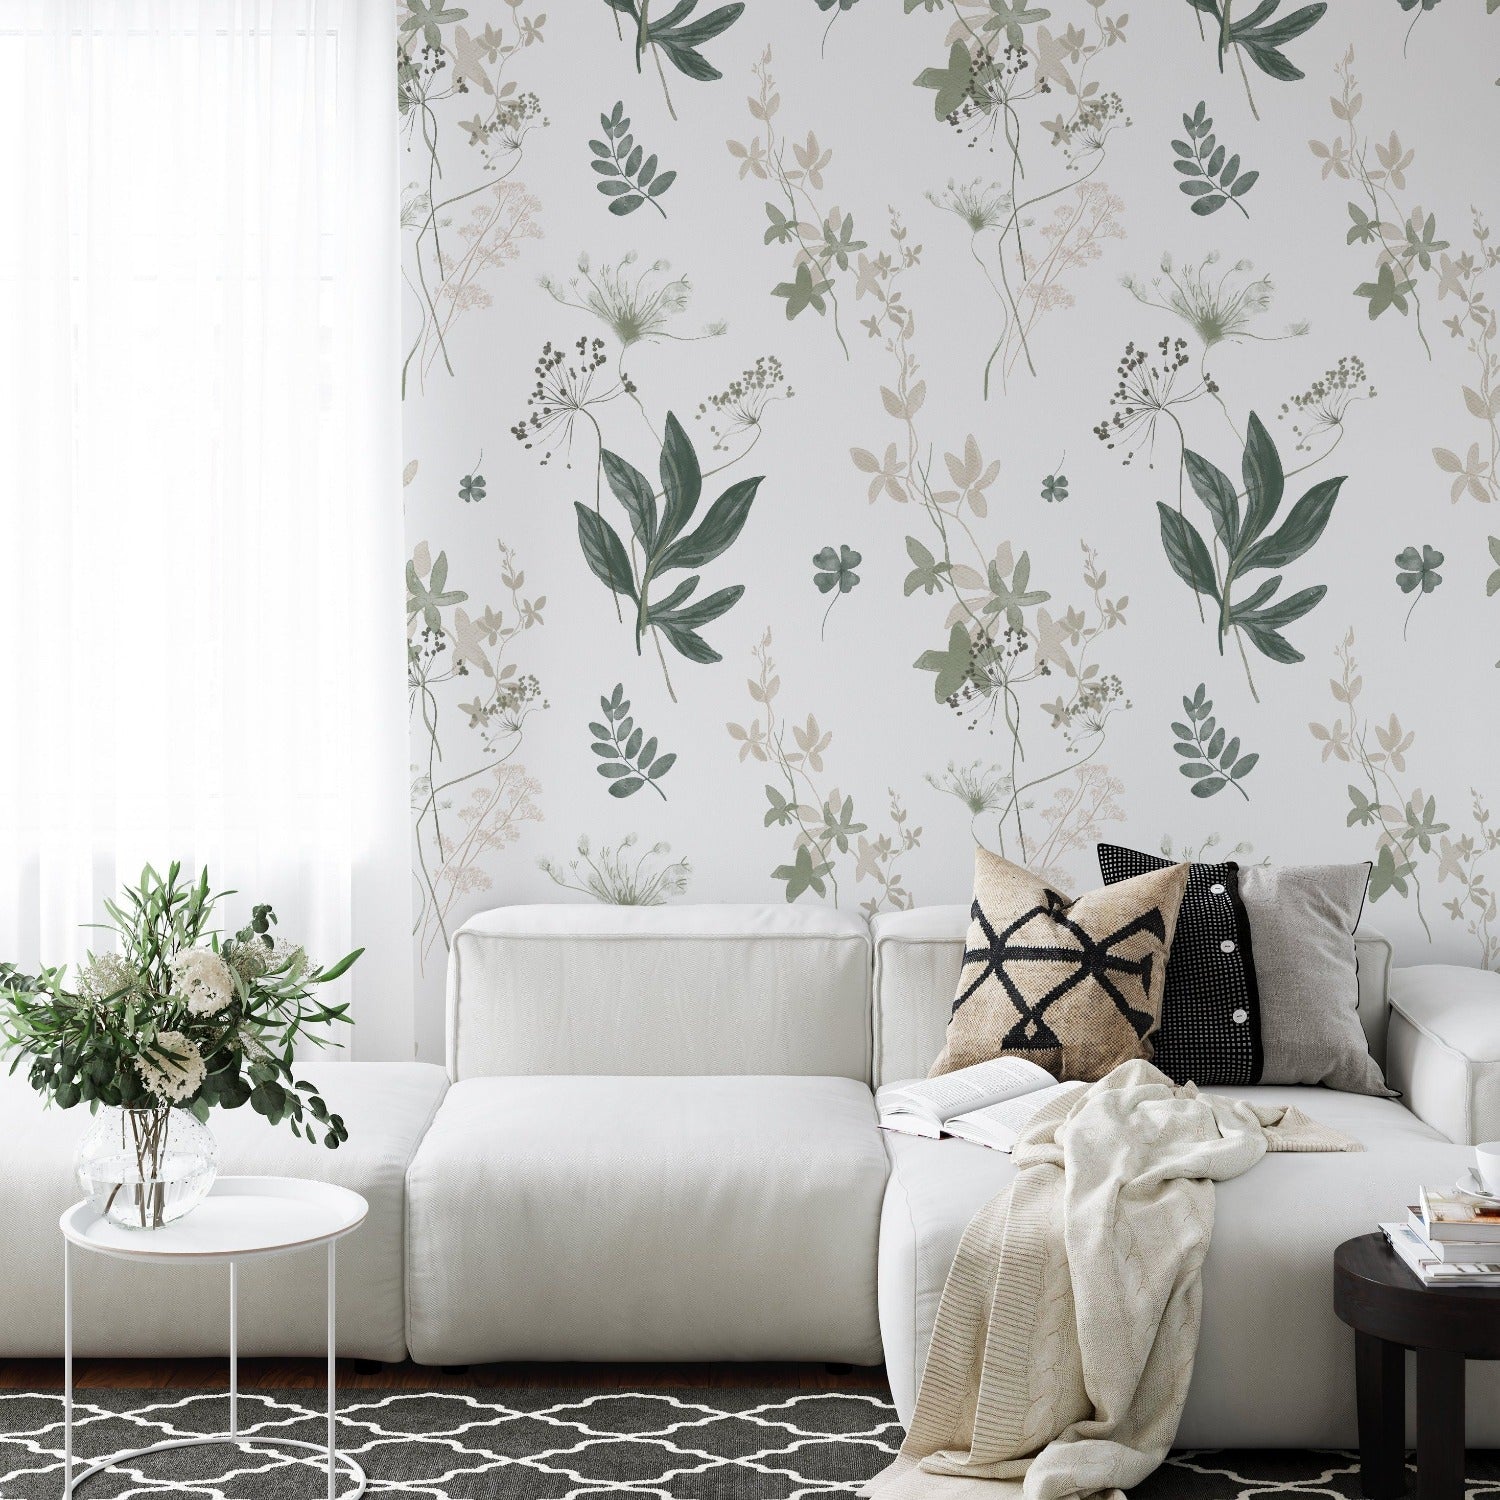 An elegant living room showcasing the "Aerie Floral IV" wallpaper, which adds a touch of nature’s serenity to the interior design. The floral pattern creates a soothing backdrop for the modern white sofa, accented with chic decorative pillows, underlining the room's sophisticated yet cozy atmosphere.